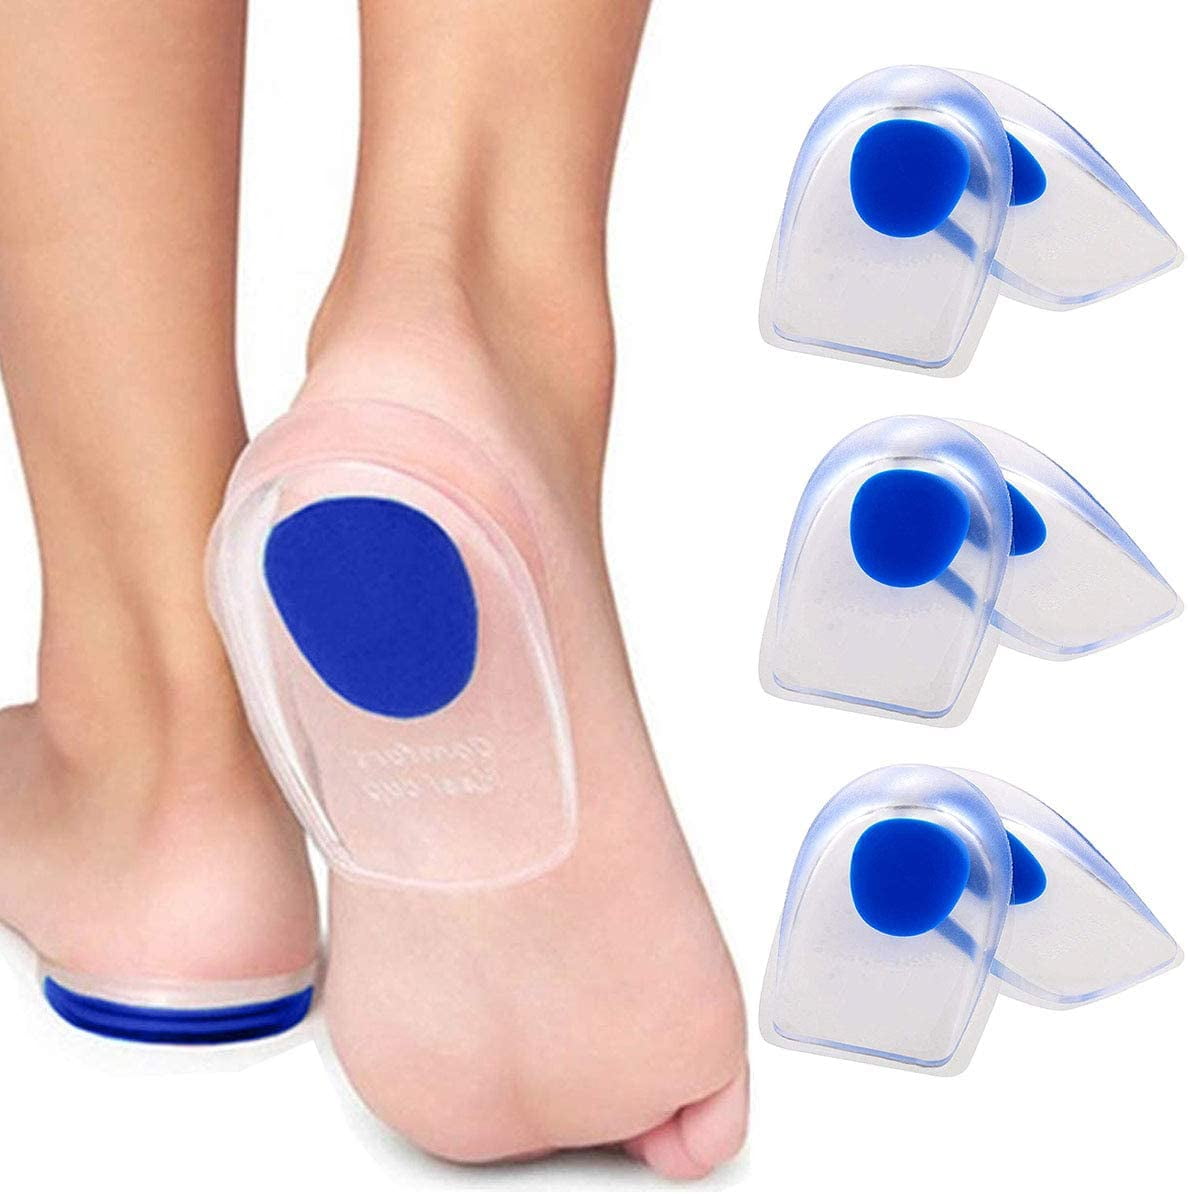 Heel Support Pad Cup Memory Form Shock Cushion Orthotic Insole Plantar Care US